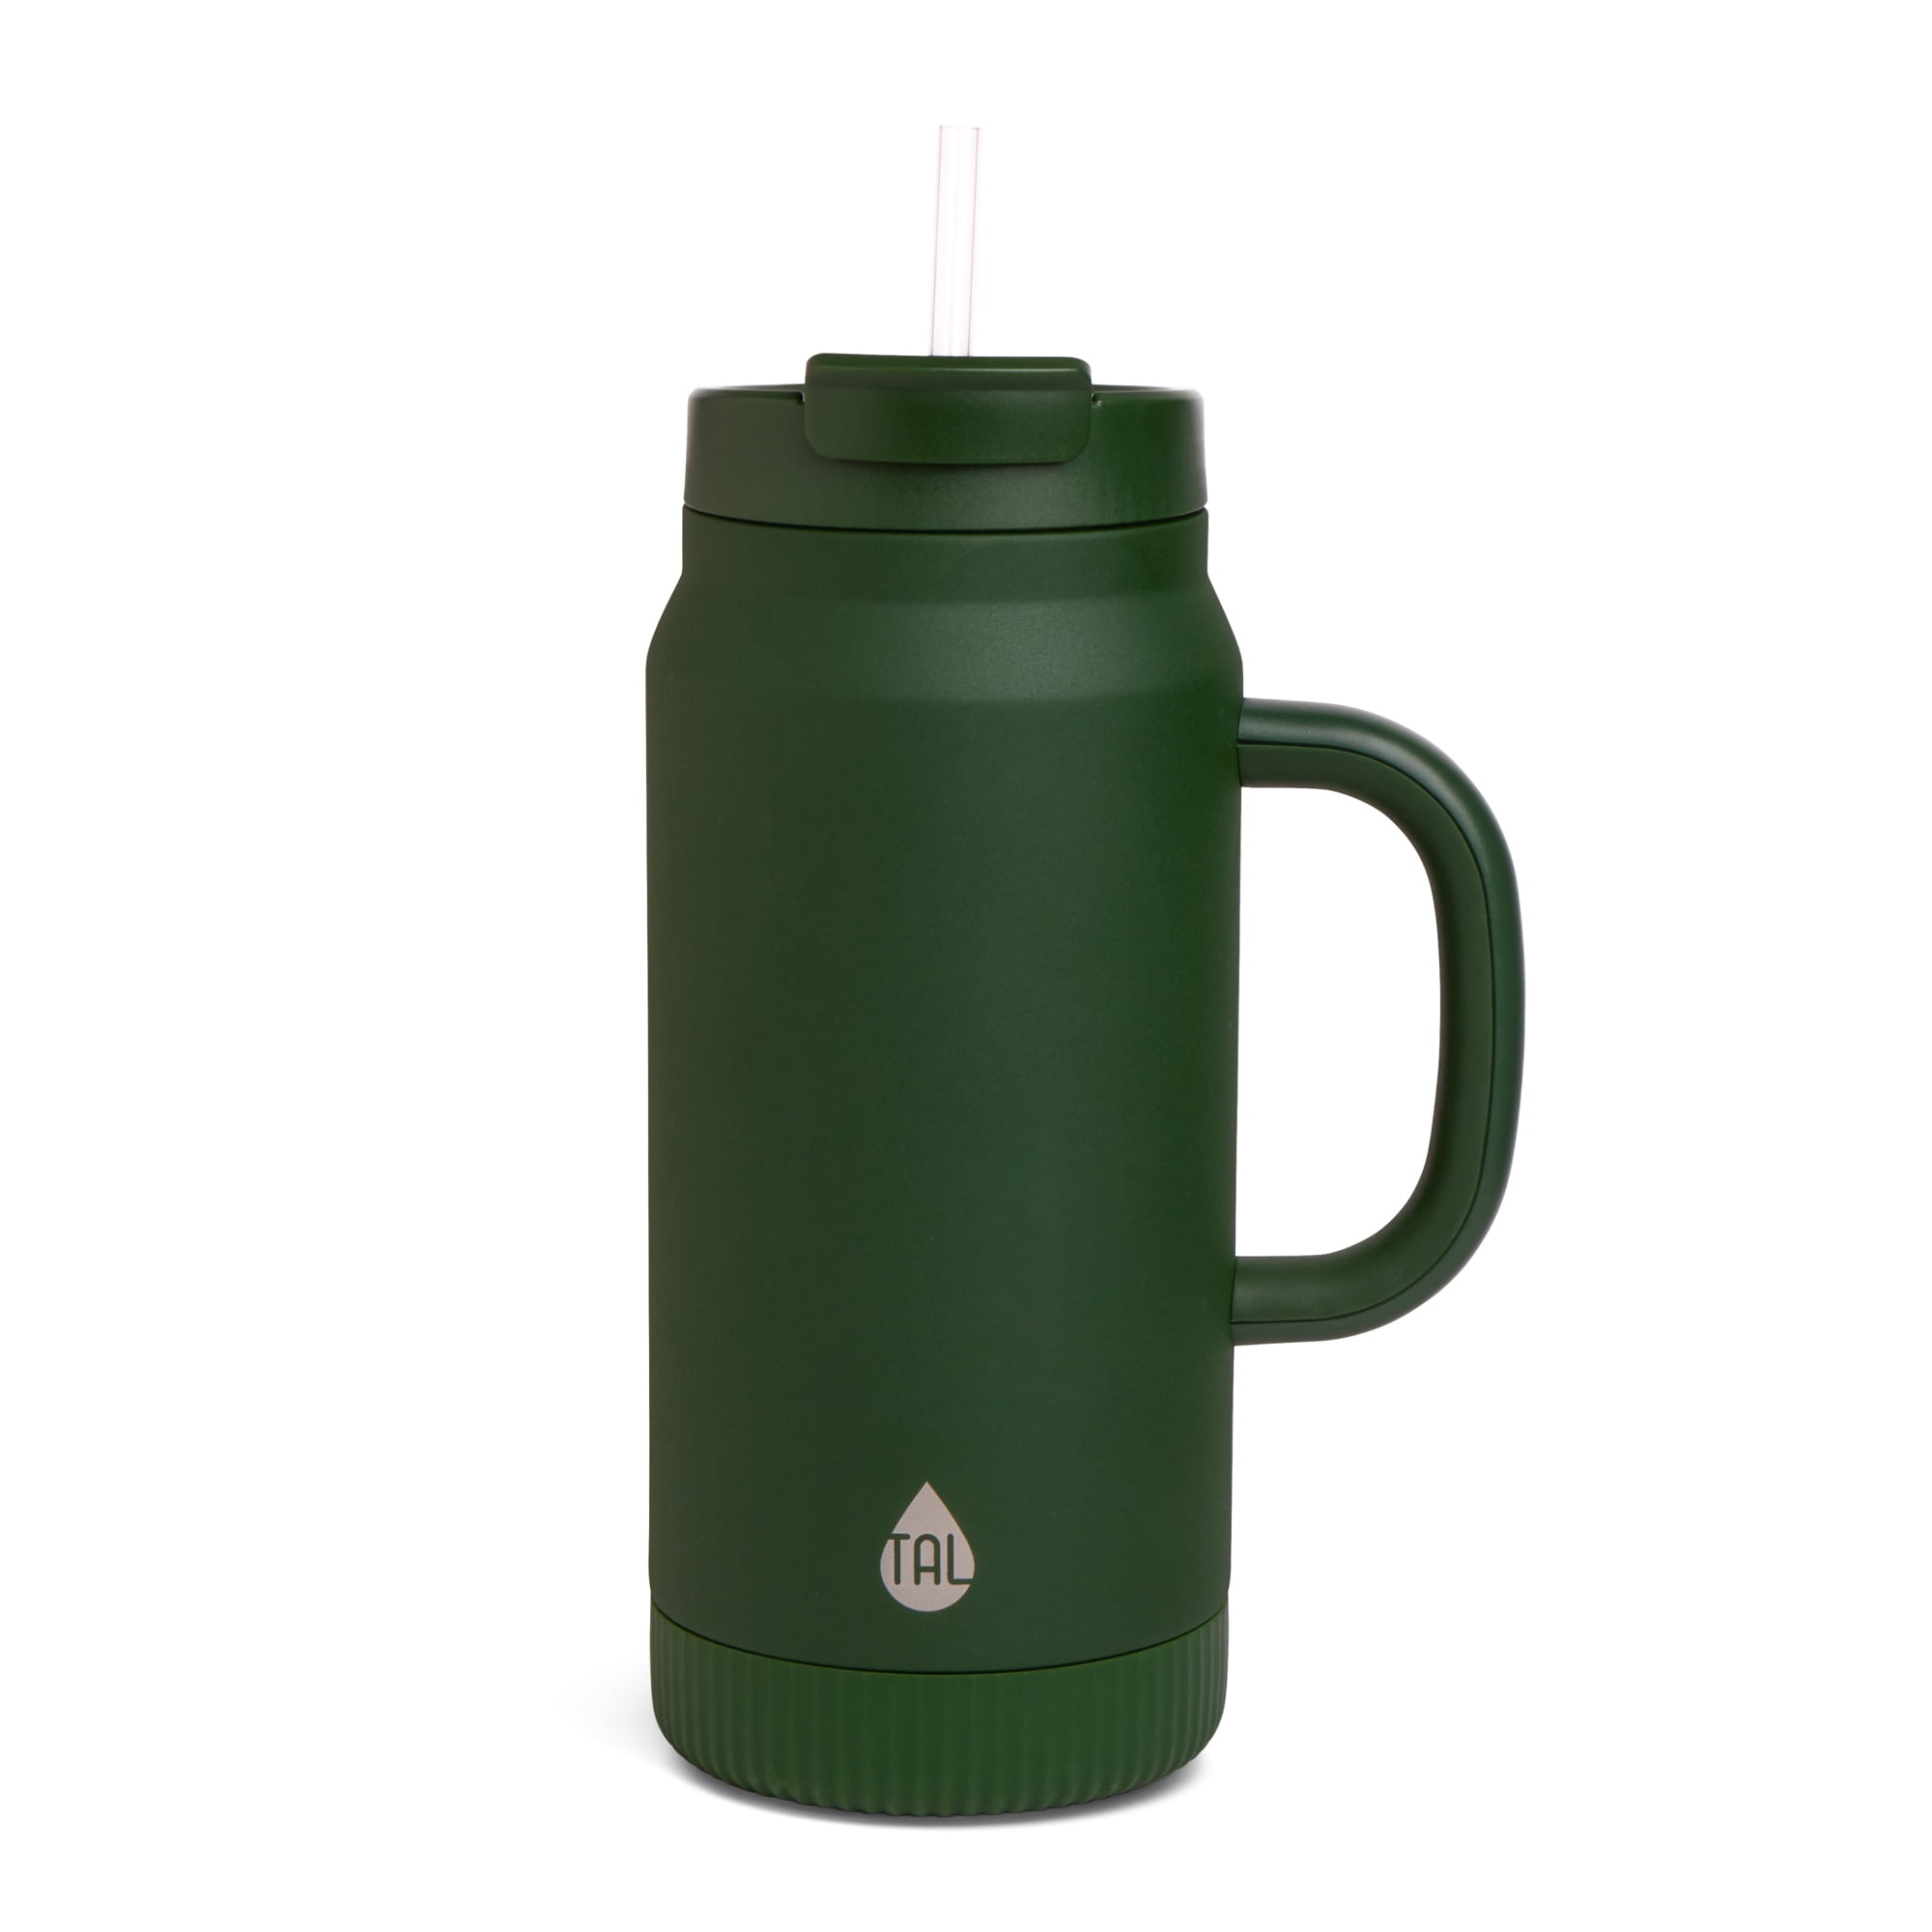 STANLEY THE QUENCHER H2.0 FLOWSTATE™ FOG TUMBLER | 40 OZ In Hand FAST  SHIPPING